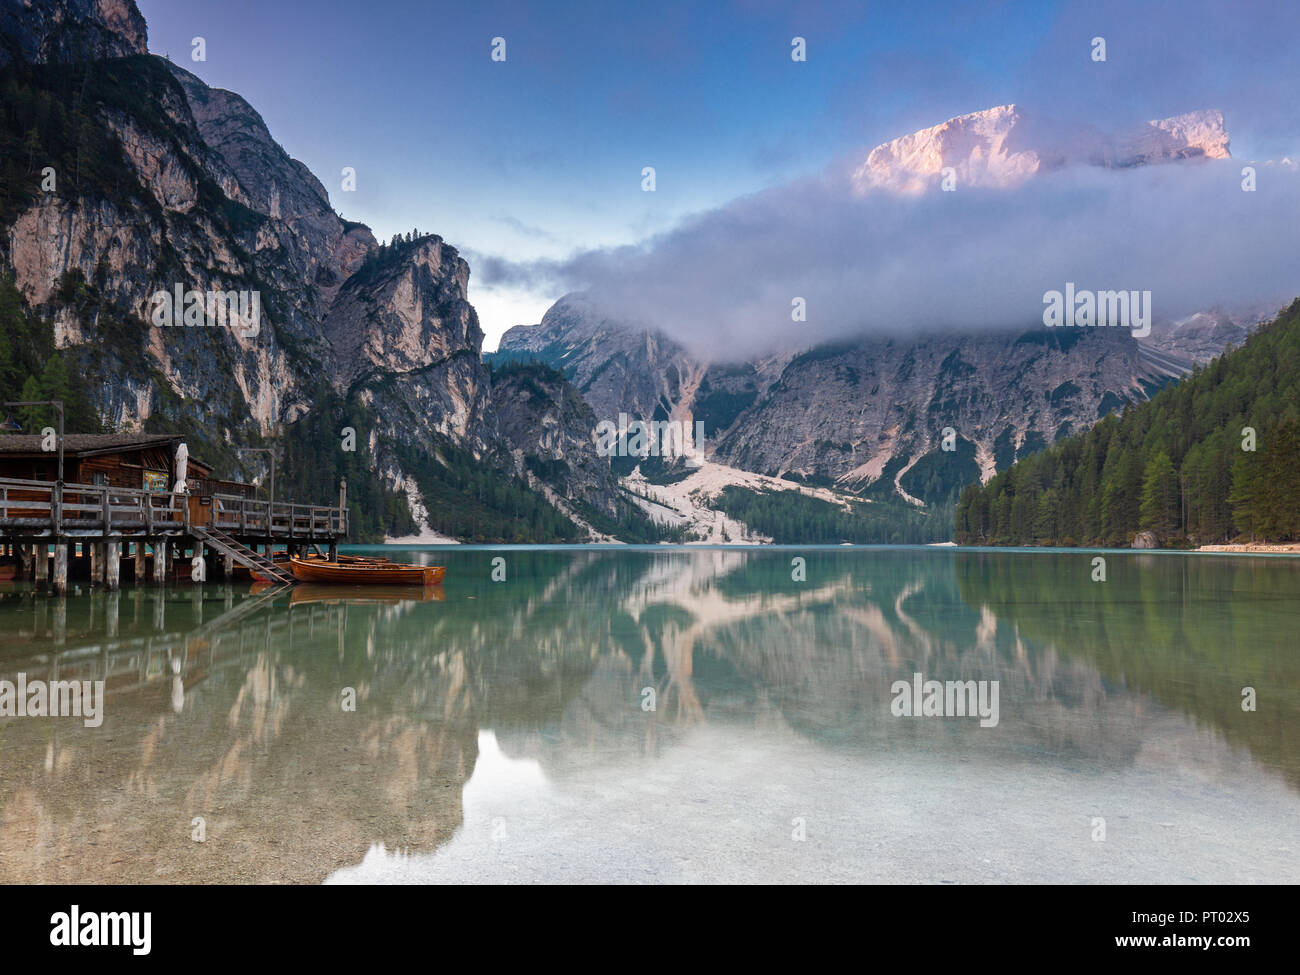 Daybreak in late summer at Lake Prags, South Tyrol Stock Photo